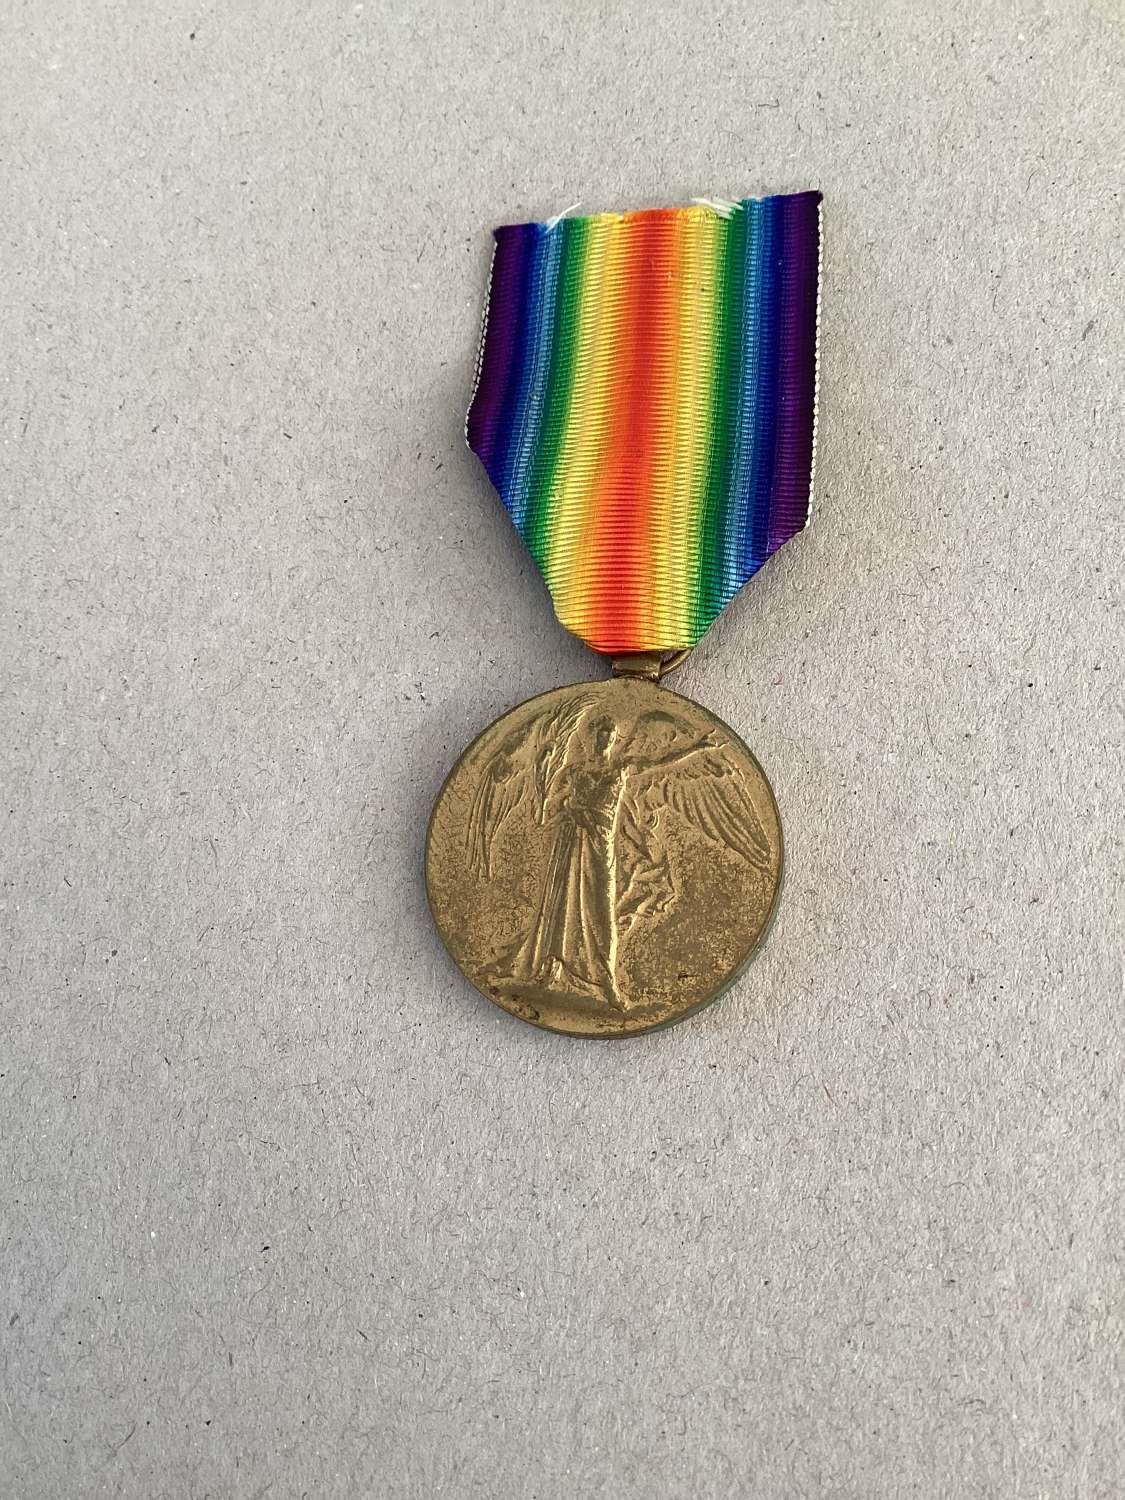 Casualty Victory Medal  Kings Shropshire Light Infantry